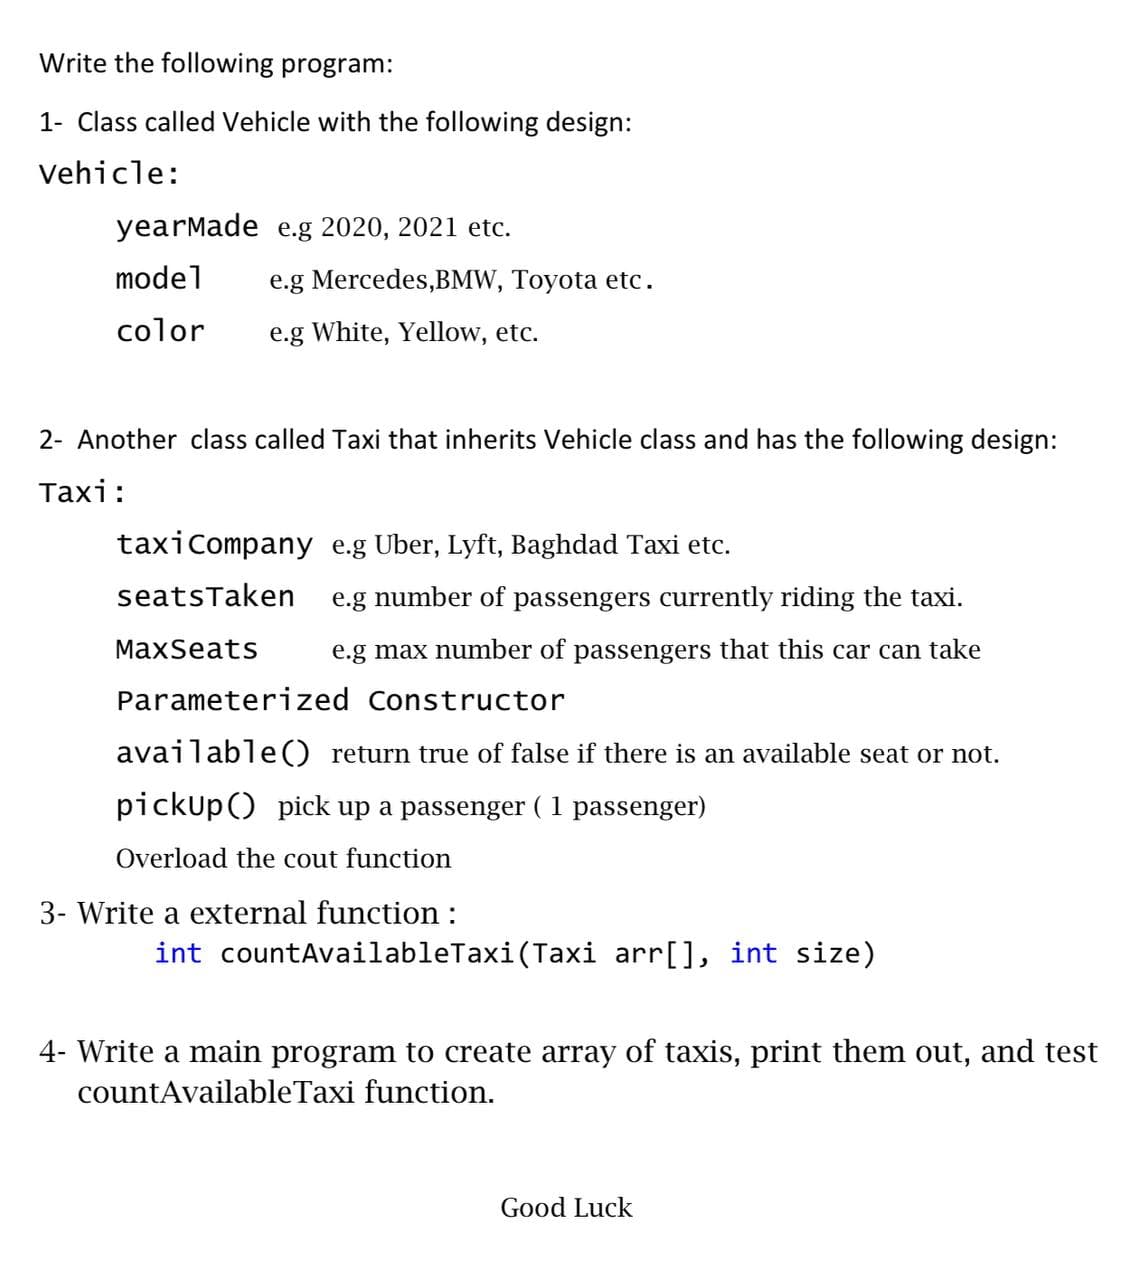 Write the following program:
1- Class called Vehicle with the following design:
Vehicle:
yearMade e.g 2020, 2021 etc.
model
e.g Mercedes,BMW, Toyota etc.
color
e.g White, Yellow, etc.
2- Another class called Taxi that inherits Vehicle class and has the following design:
Таxi:
taxicompany e.g Uber, Lyft, Baghdad Taxi etc.
seatsTaken
e.g number of passengers currently riding the taxi.
MaxSeats
e.g max number of passengers that this car can take
Parameterized Constructor
available() return true of false if there is an available seat or not.
pickup() pick up a passenger ( 1 passenger)
Overload the cout function
3- Write a external function :
int countAvailableTaxi (Taxi arr[], int size)
4- Write a main program to create array of taxis, print them out, and test
countAvailableTaxi function.
Good Luck
